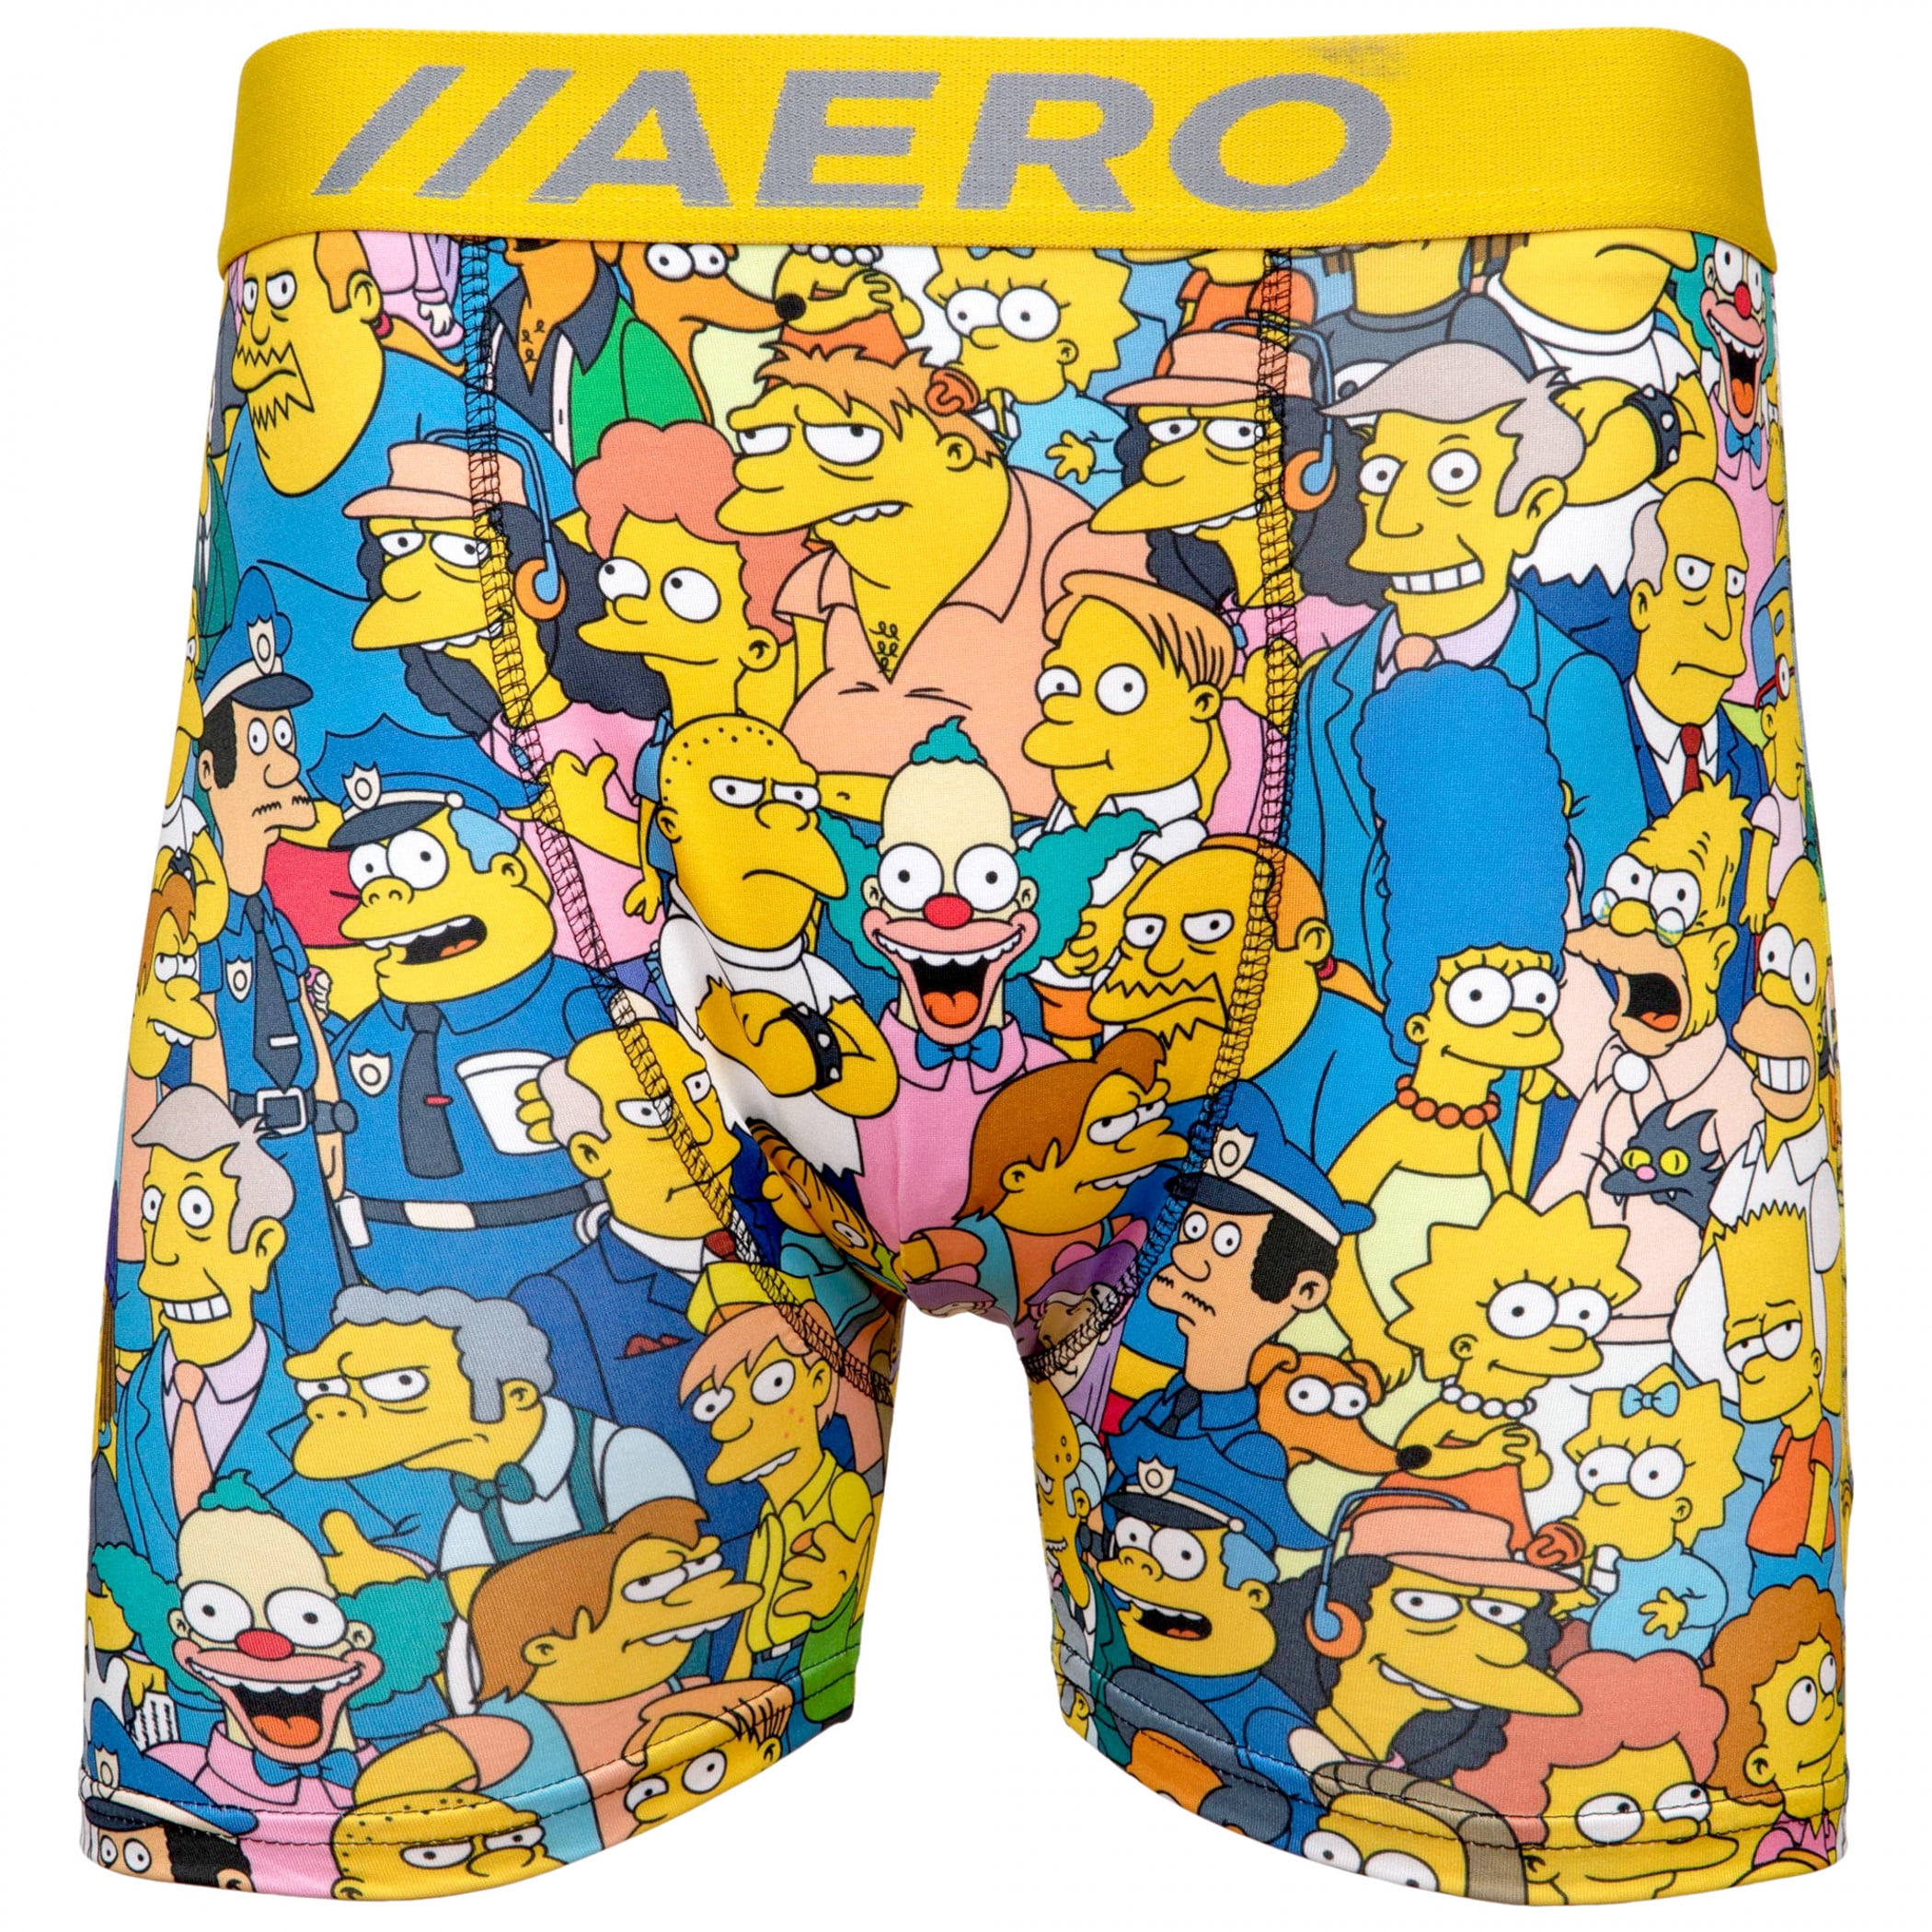 Aeropostale Limited Edition The Simpsons Performance Men's Boxer